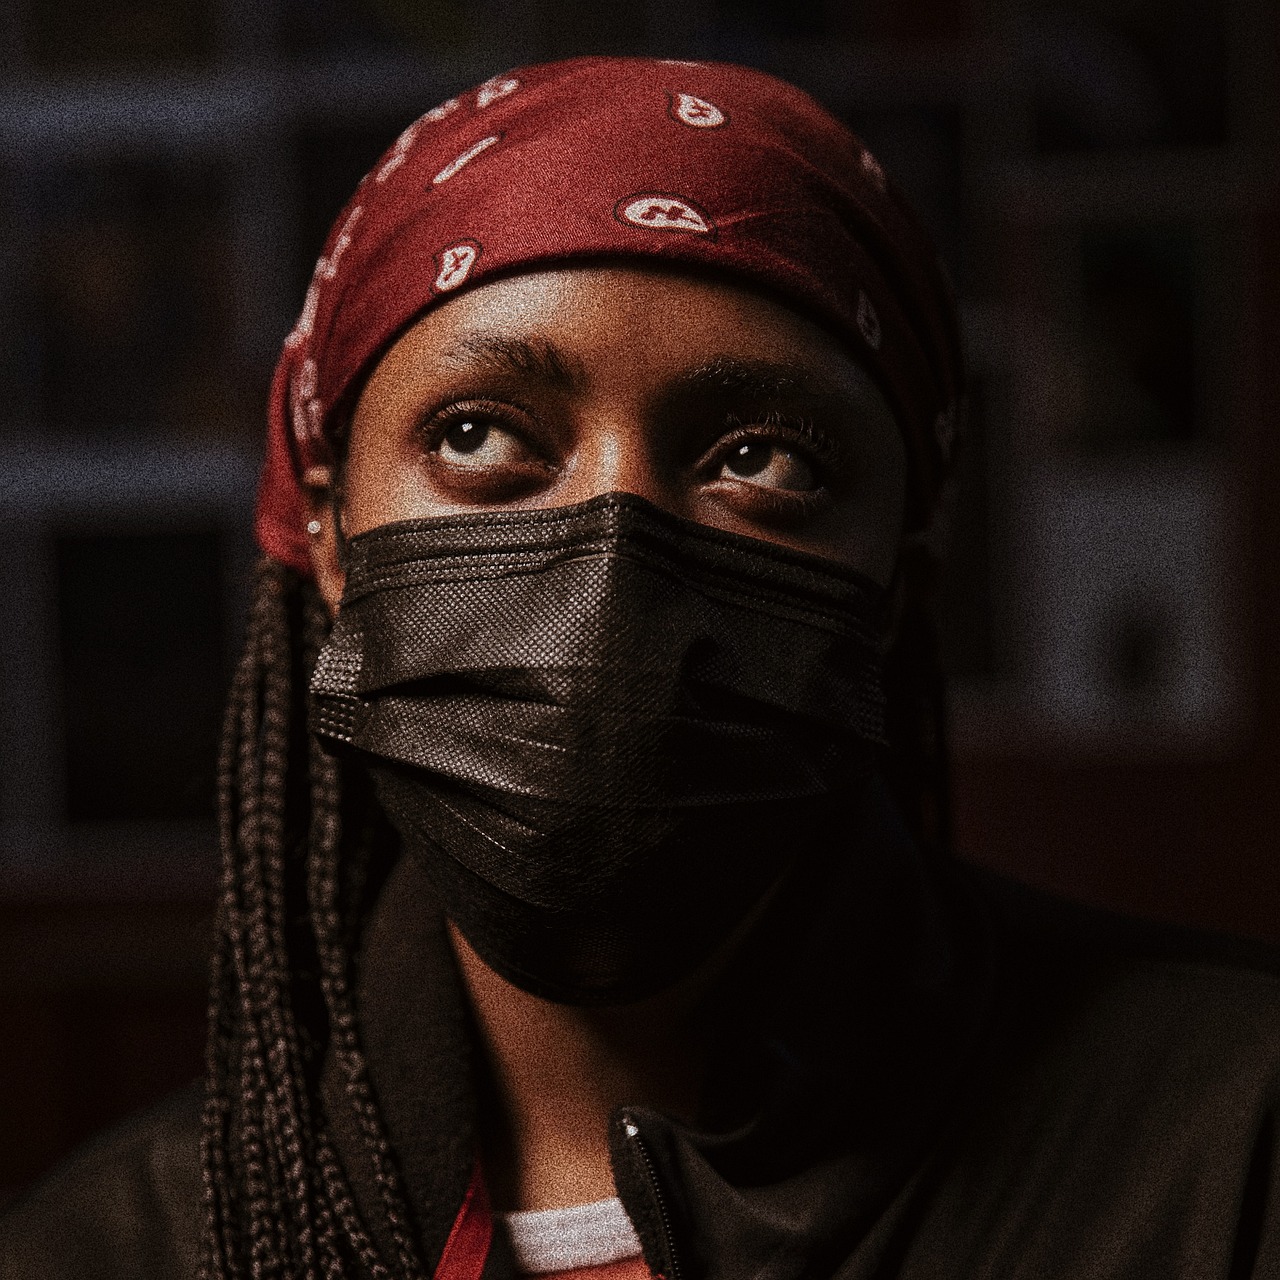 a close up of a person wearing a face mask, a portrait, she is wearing streetwear, riyahd cassiem, dimly - lit, bandana